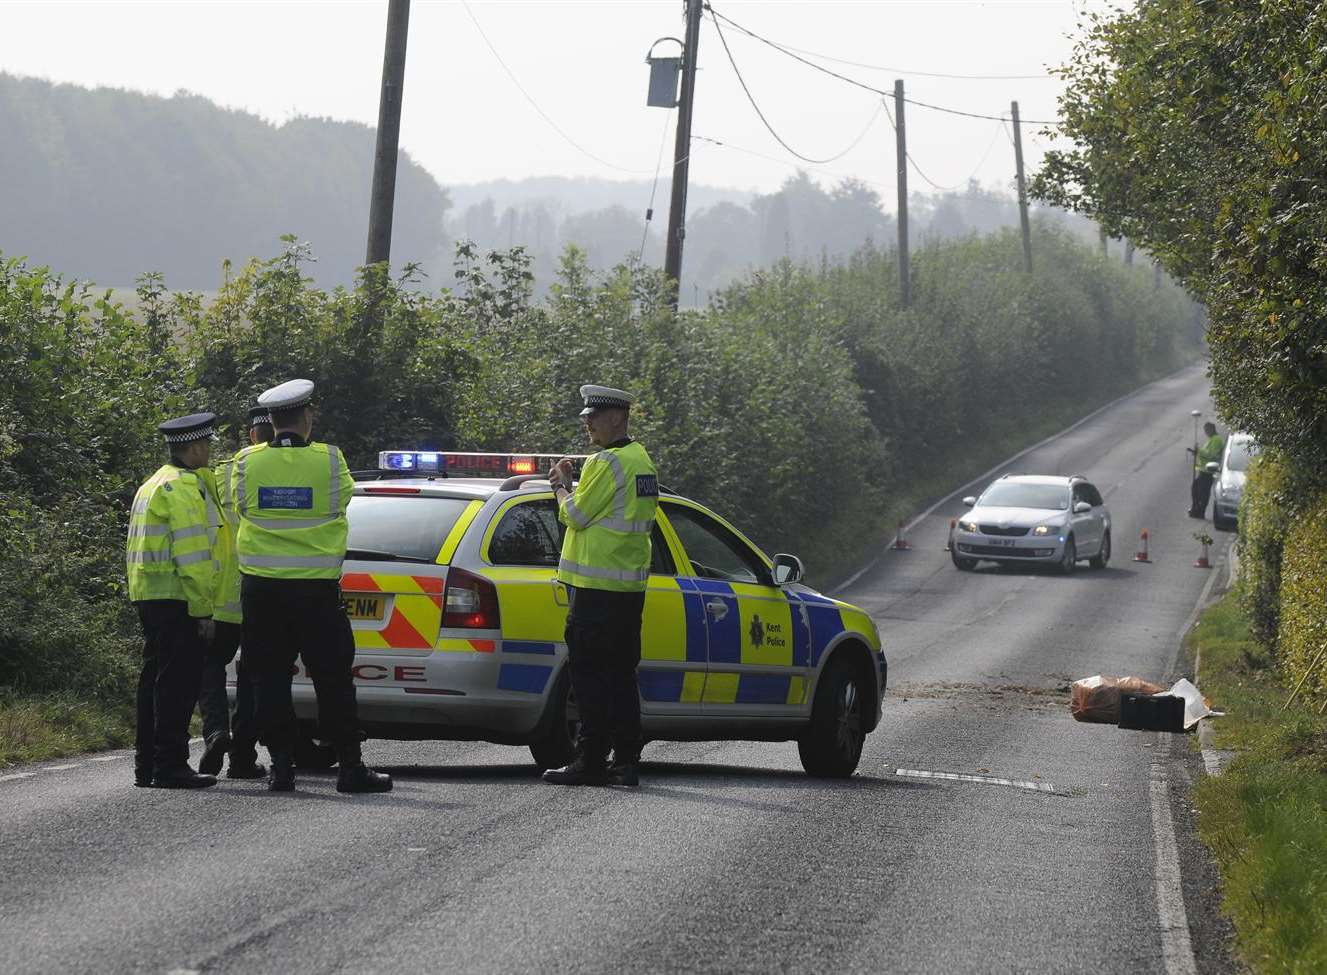 Police at the scene of the crash in Stone Street, Petham